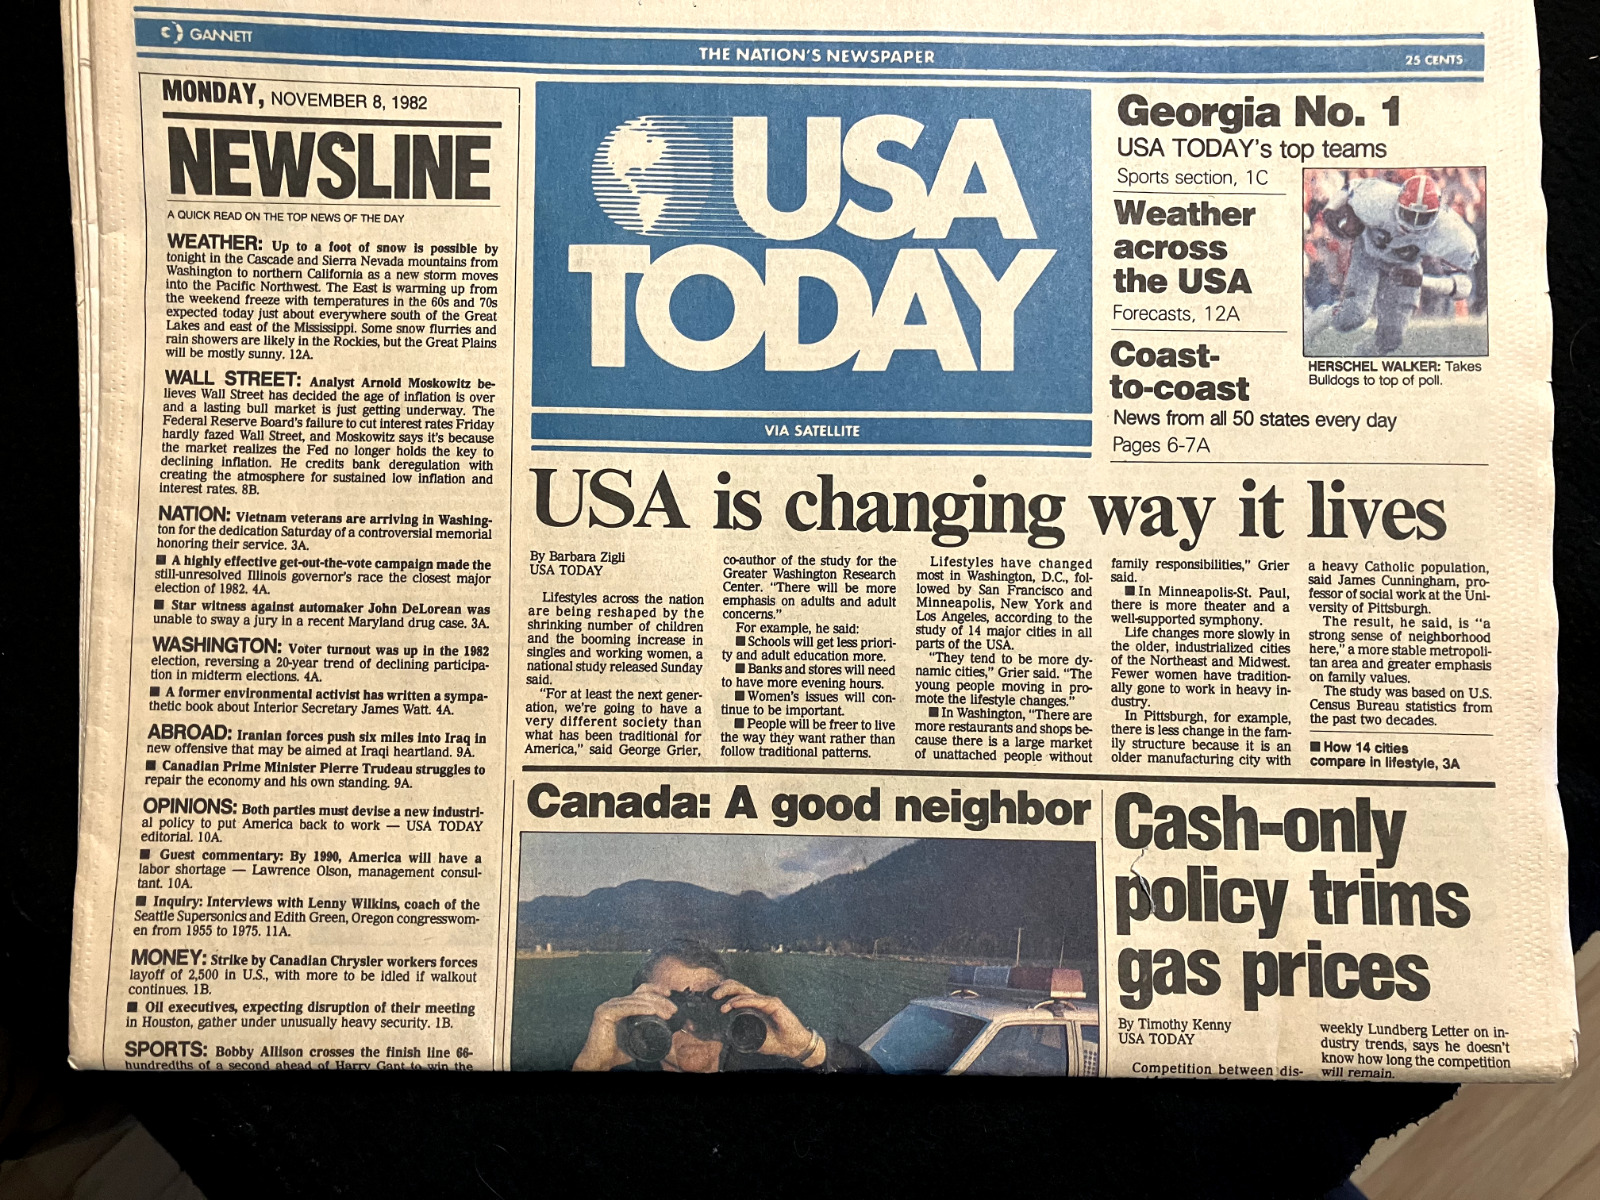 USA Today Newspaper - November 8, 1982 - First Edition Seattle Area